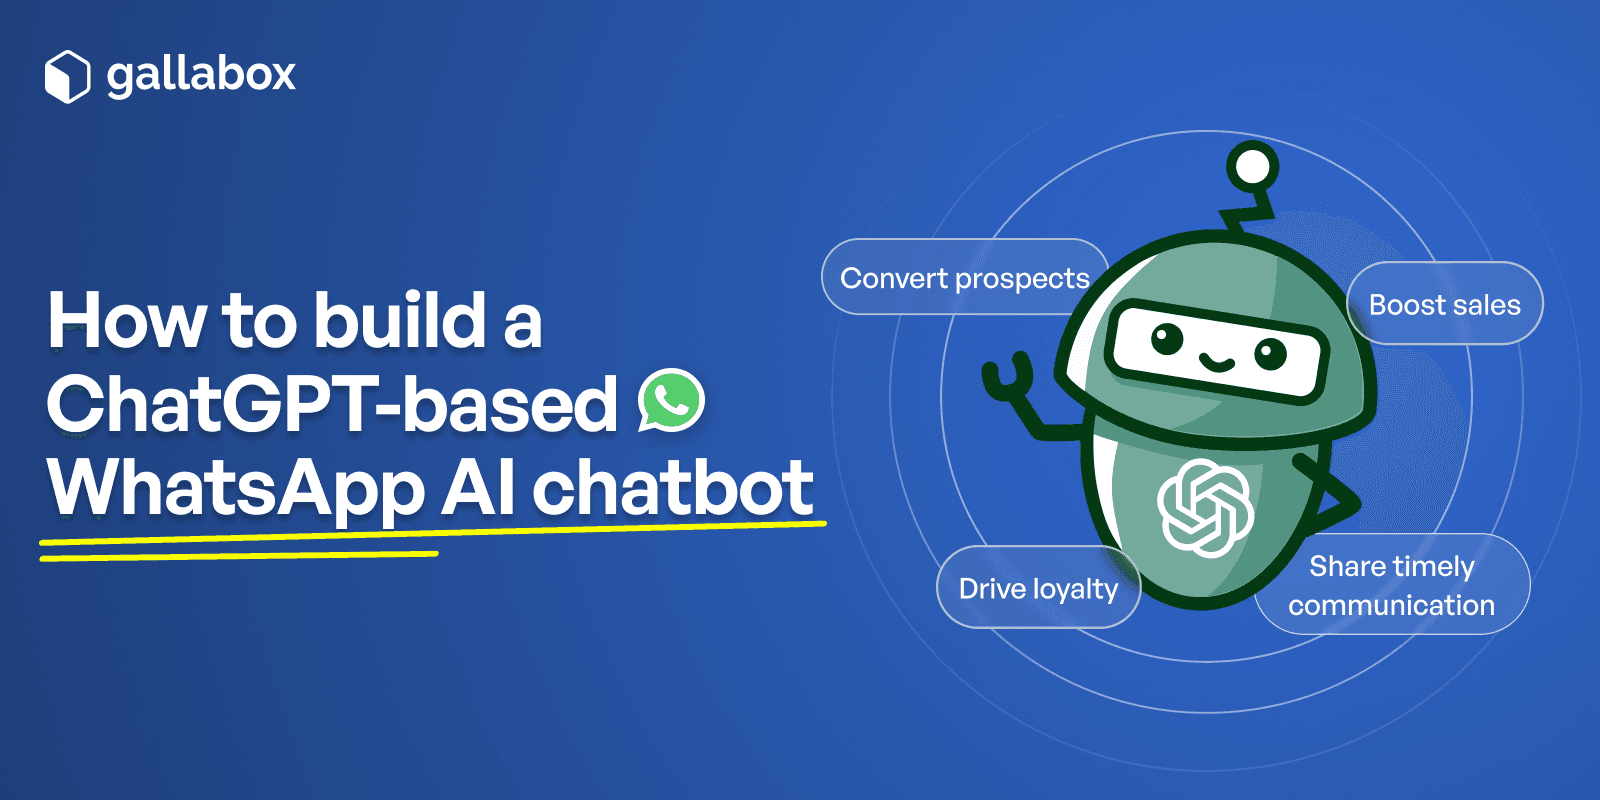 How to easily build a ChatGPT-based WhatsApp AI Chatbot